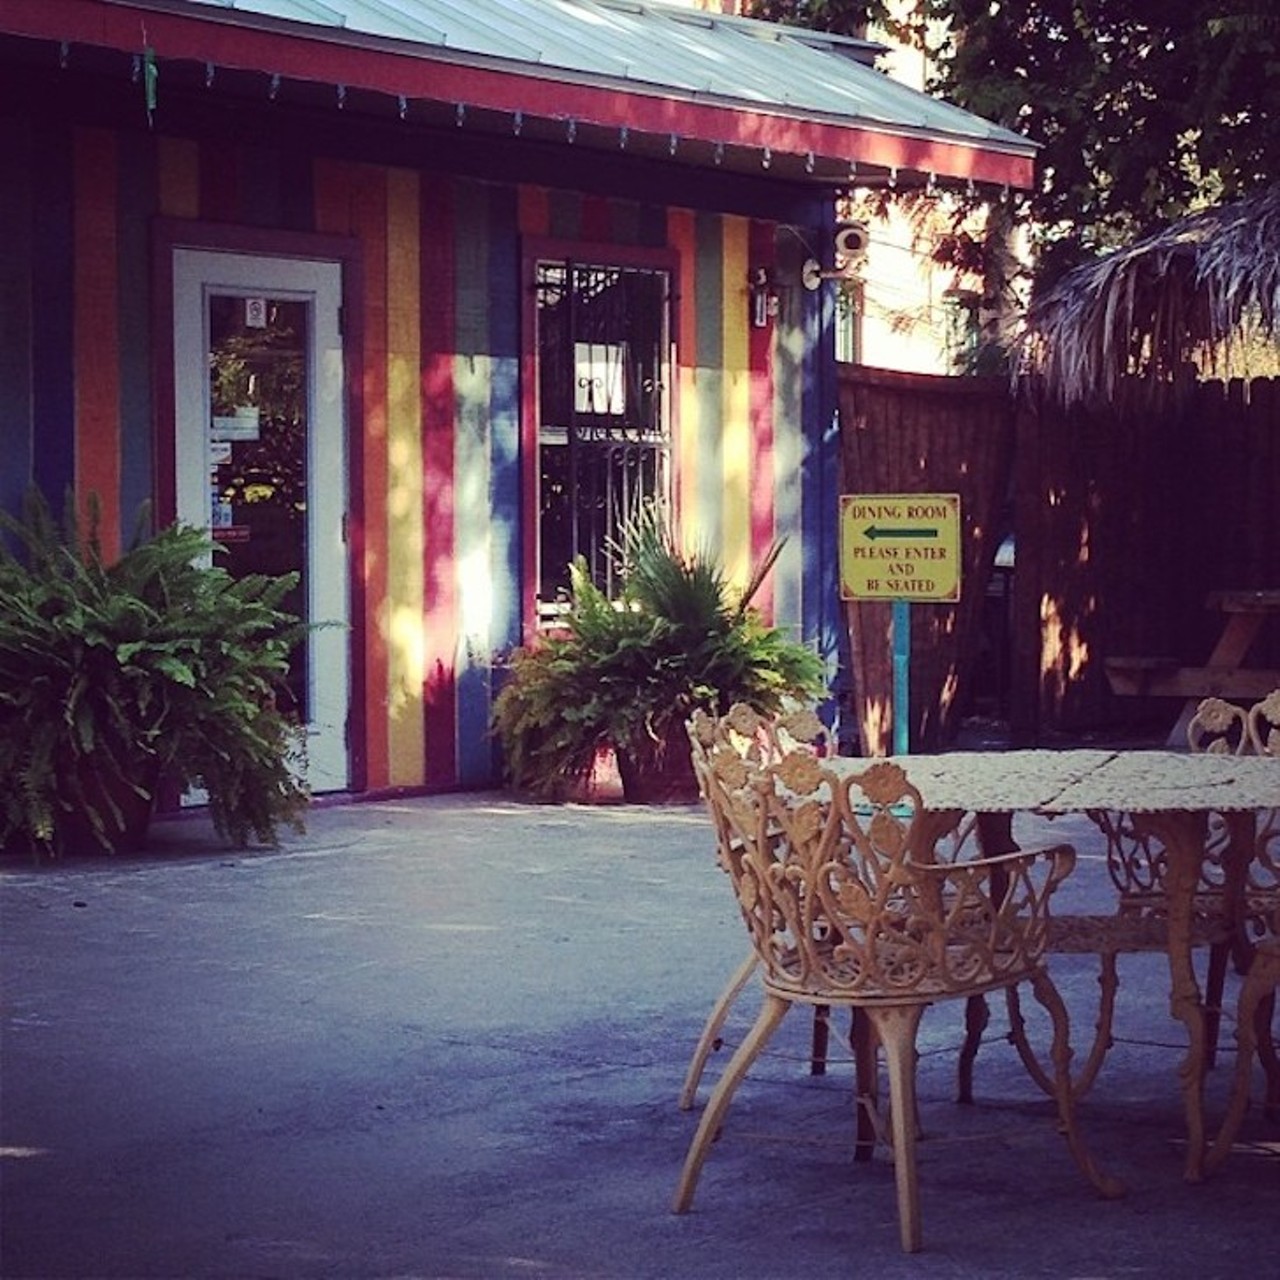 Cascabel Mexican Patio 
1000 S. Saint Mary's St., (210) 212-6456  
Visit this colorful spot for home-style Mexican eats on a sunny day with Spike.  
Photo via Instagram (syeiraq)